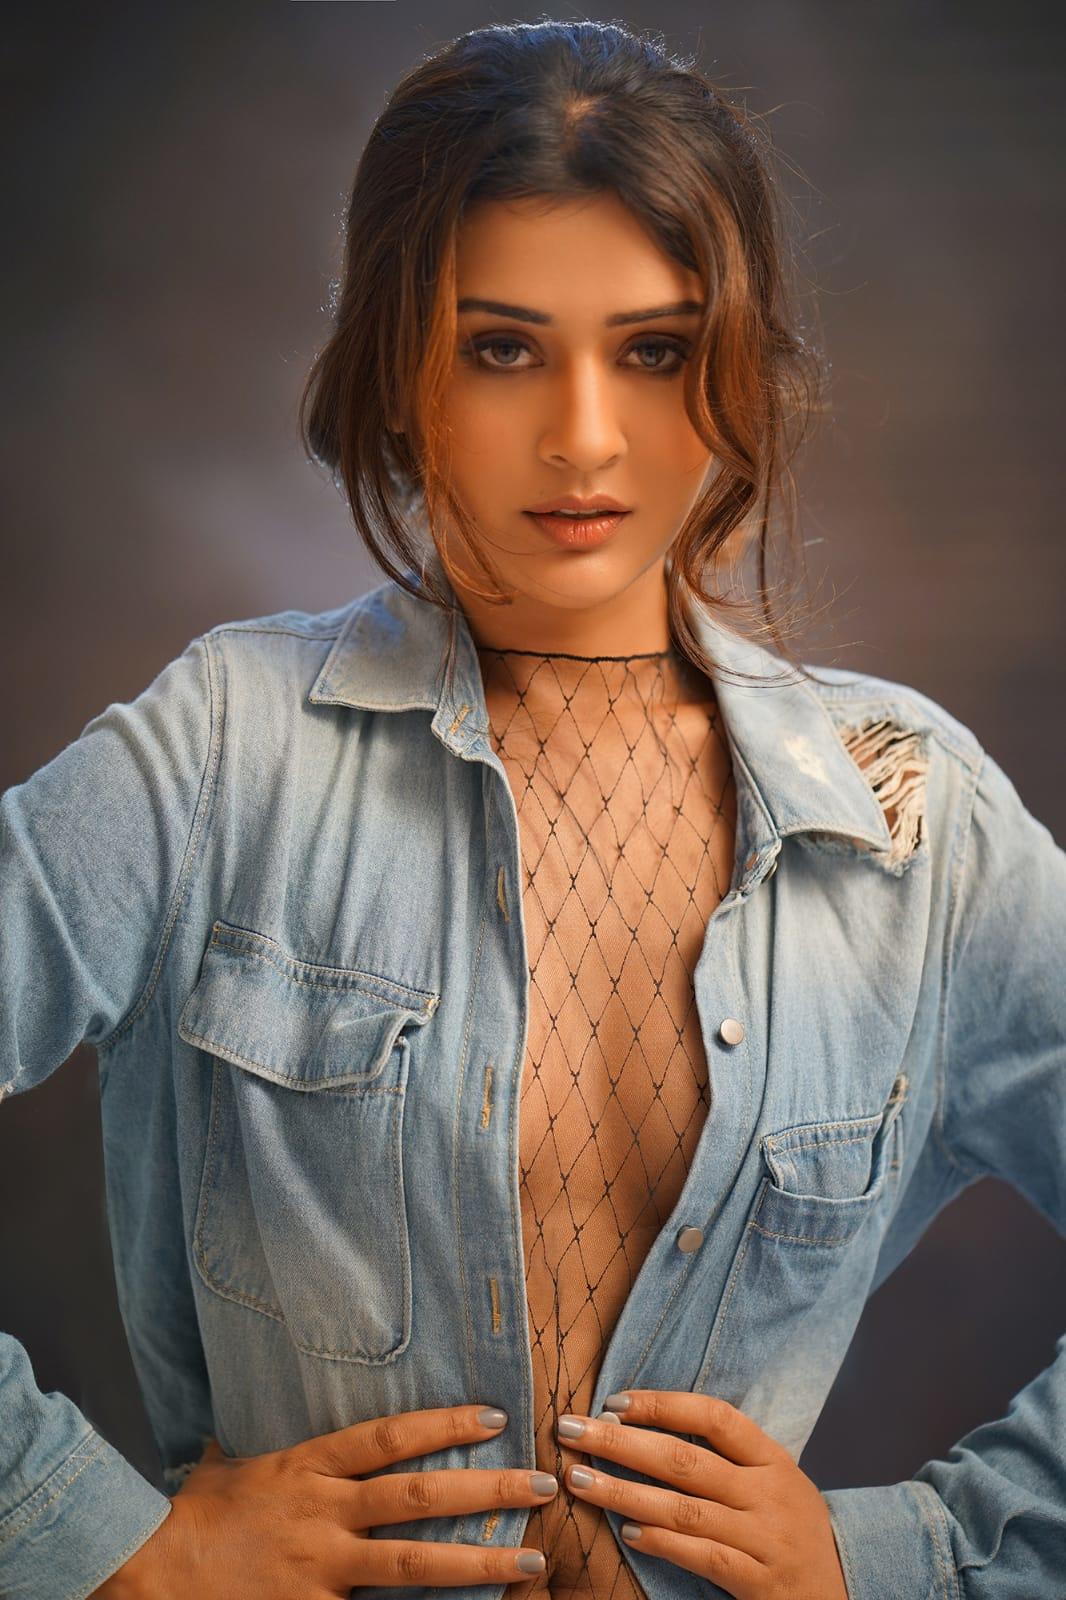 RX 100 fame Payal Rajput to debut in Kannada with Dhananjayas Head Bush Kannada Movie News pic picture